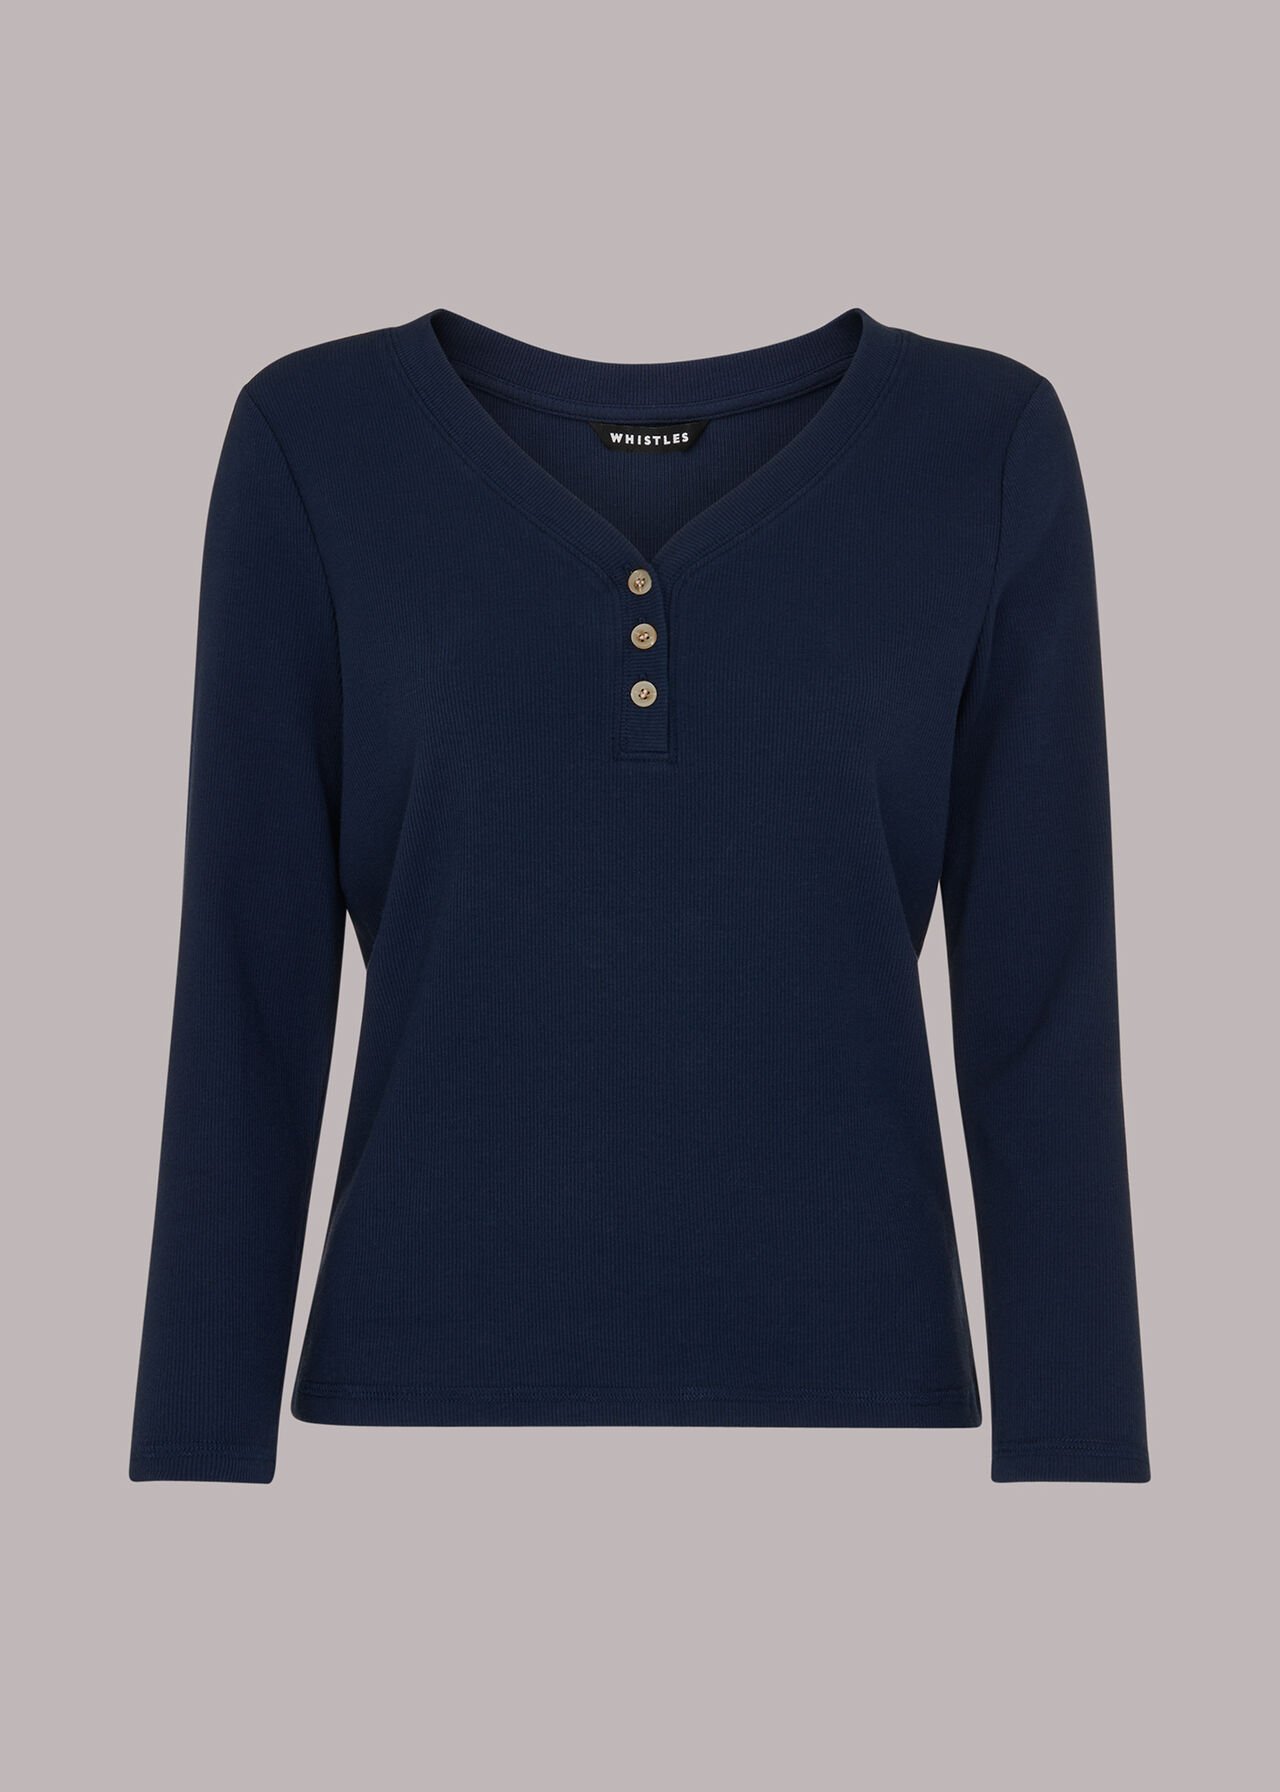 Paiton Ribbed Button Front Top